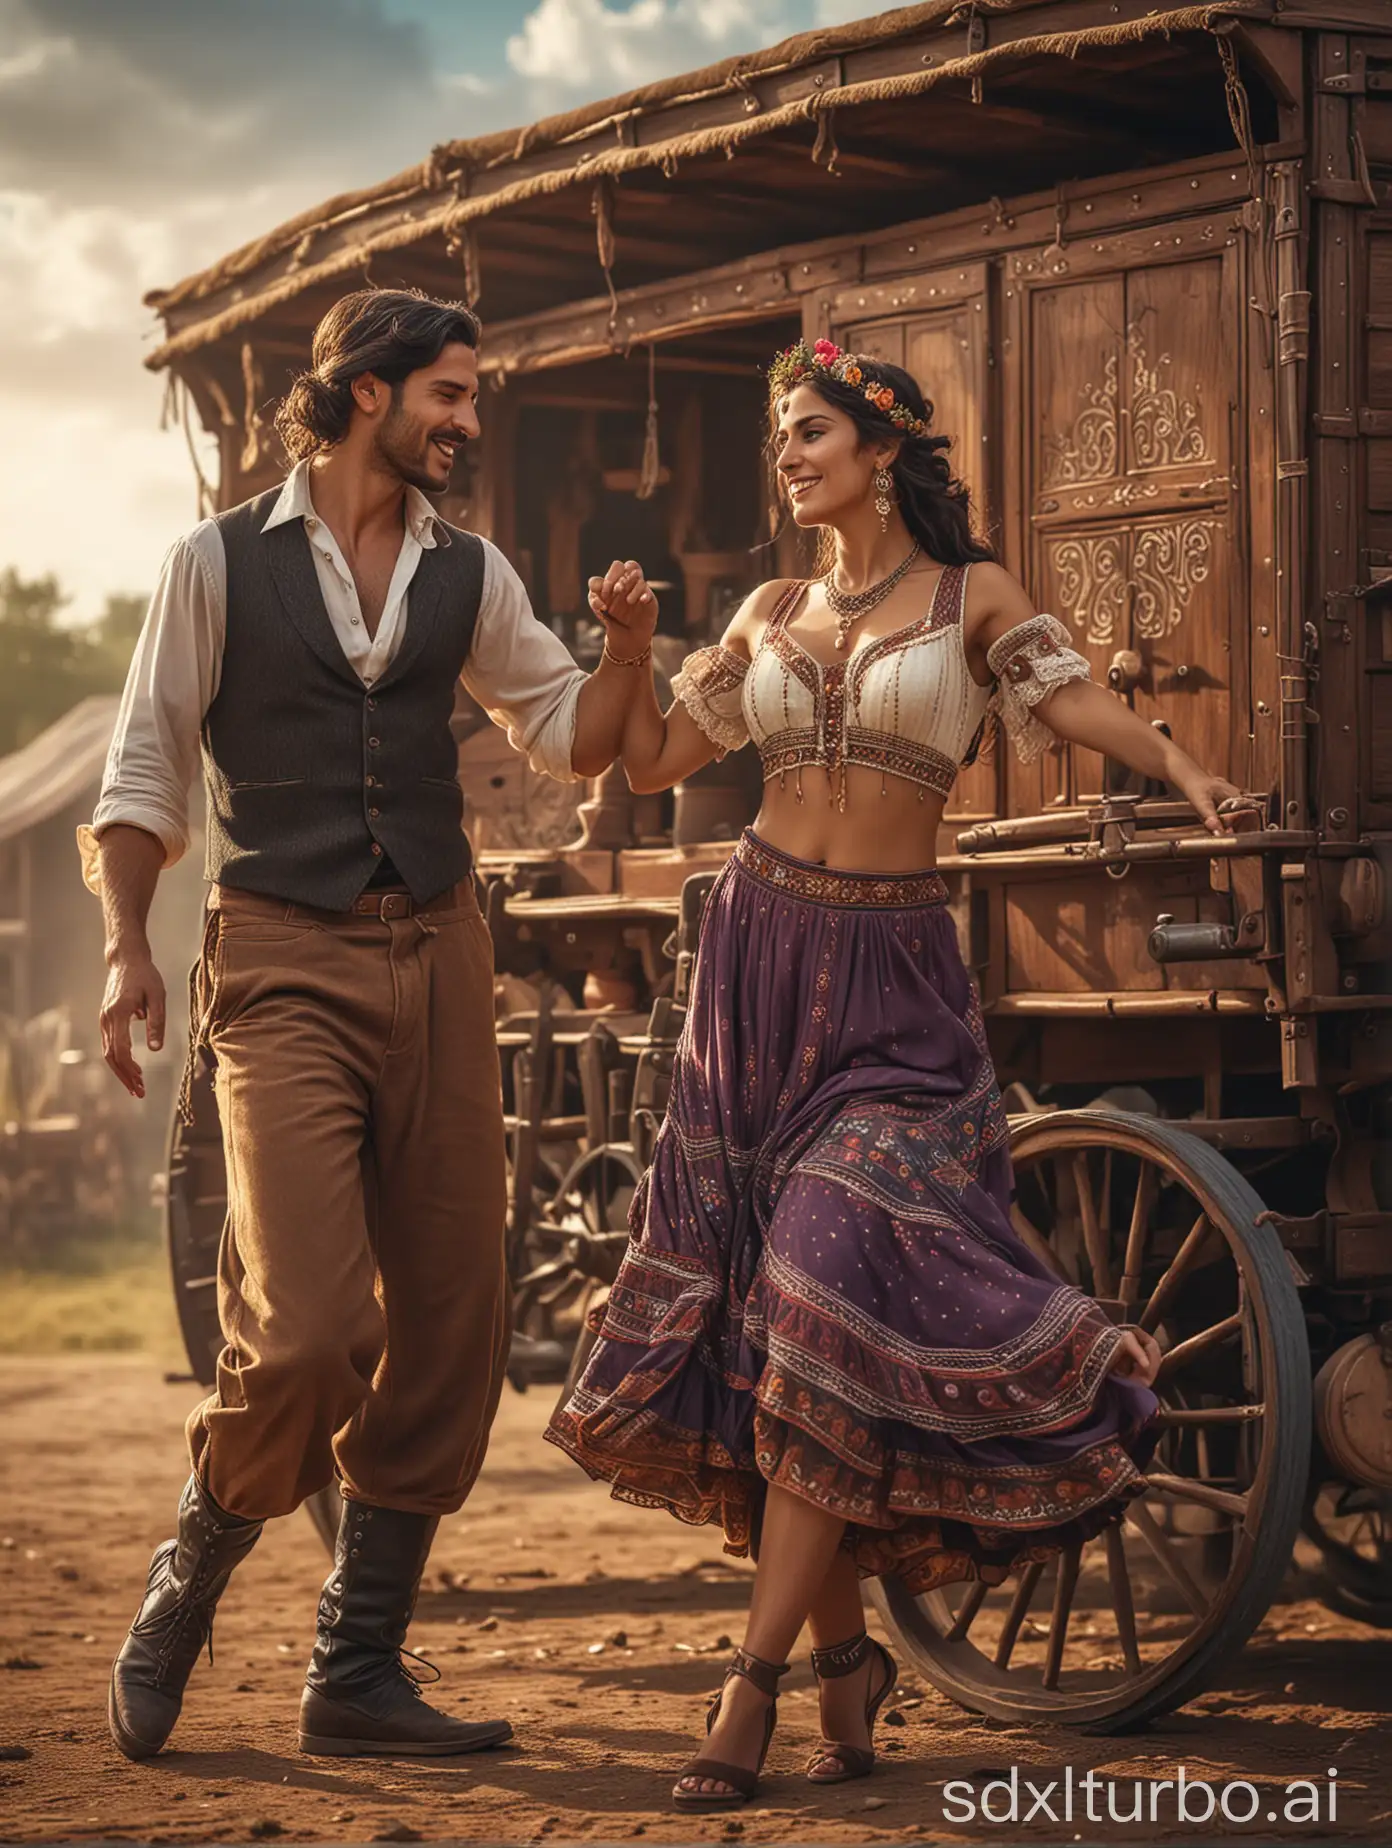 Dynamic-Gypsy-Couple-Dancing-in-Front-of-Wagon-HyperRealistic-Digital-Photography